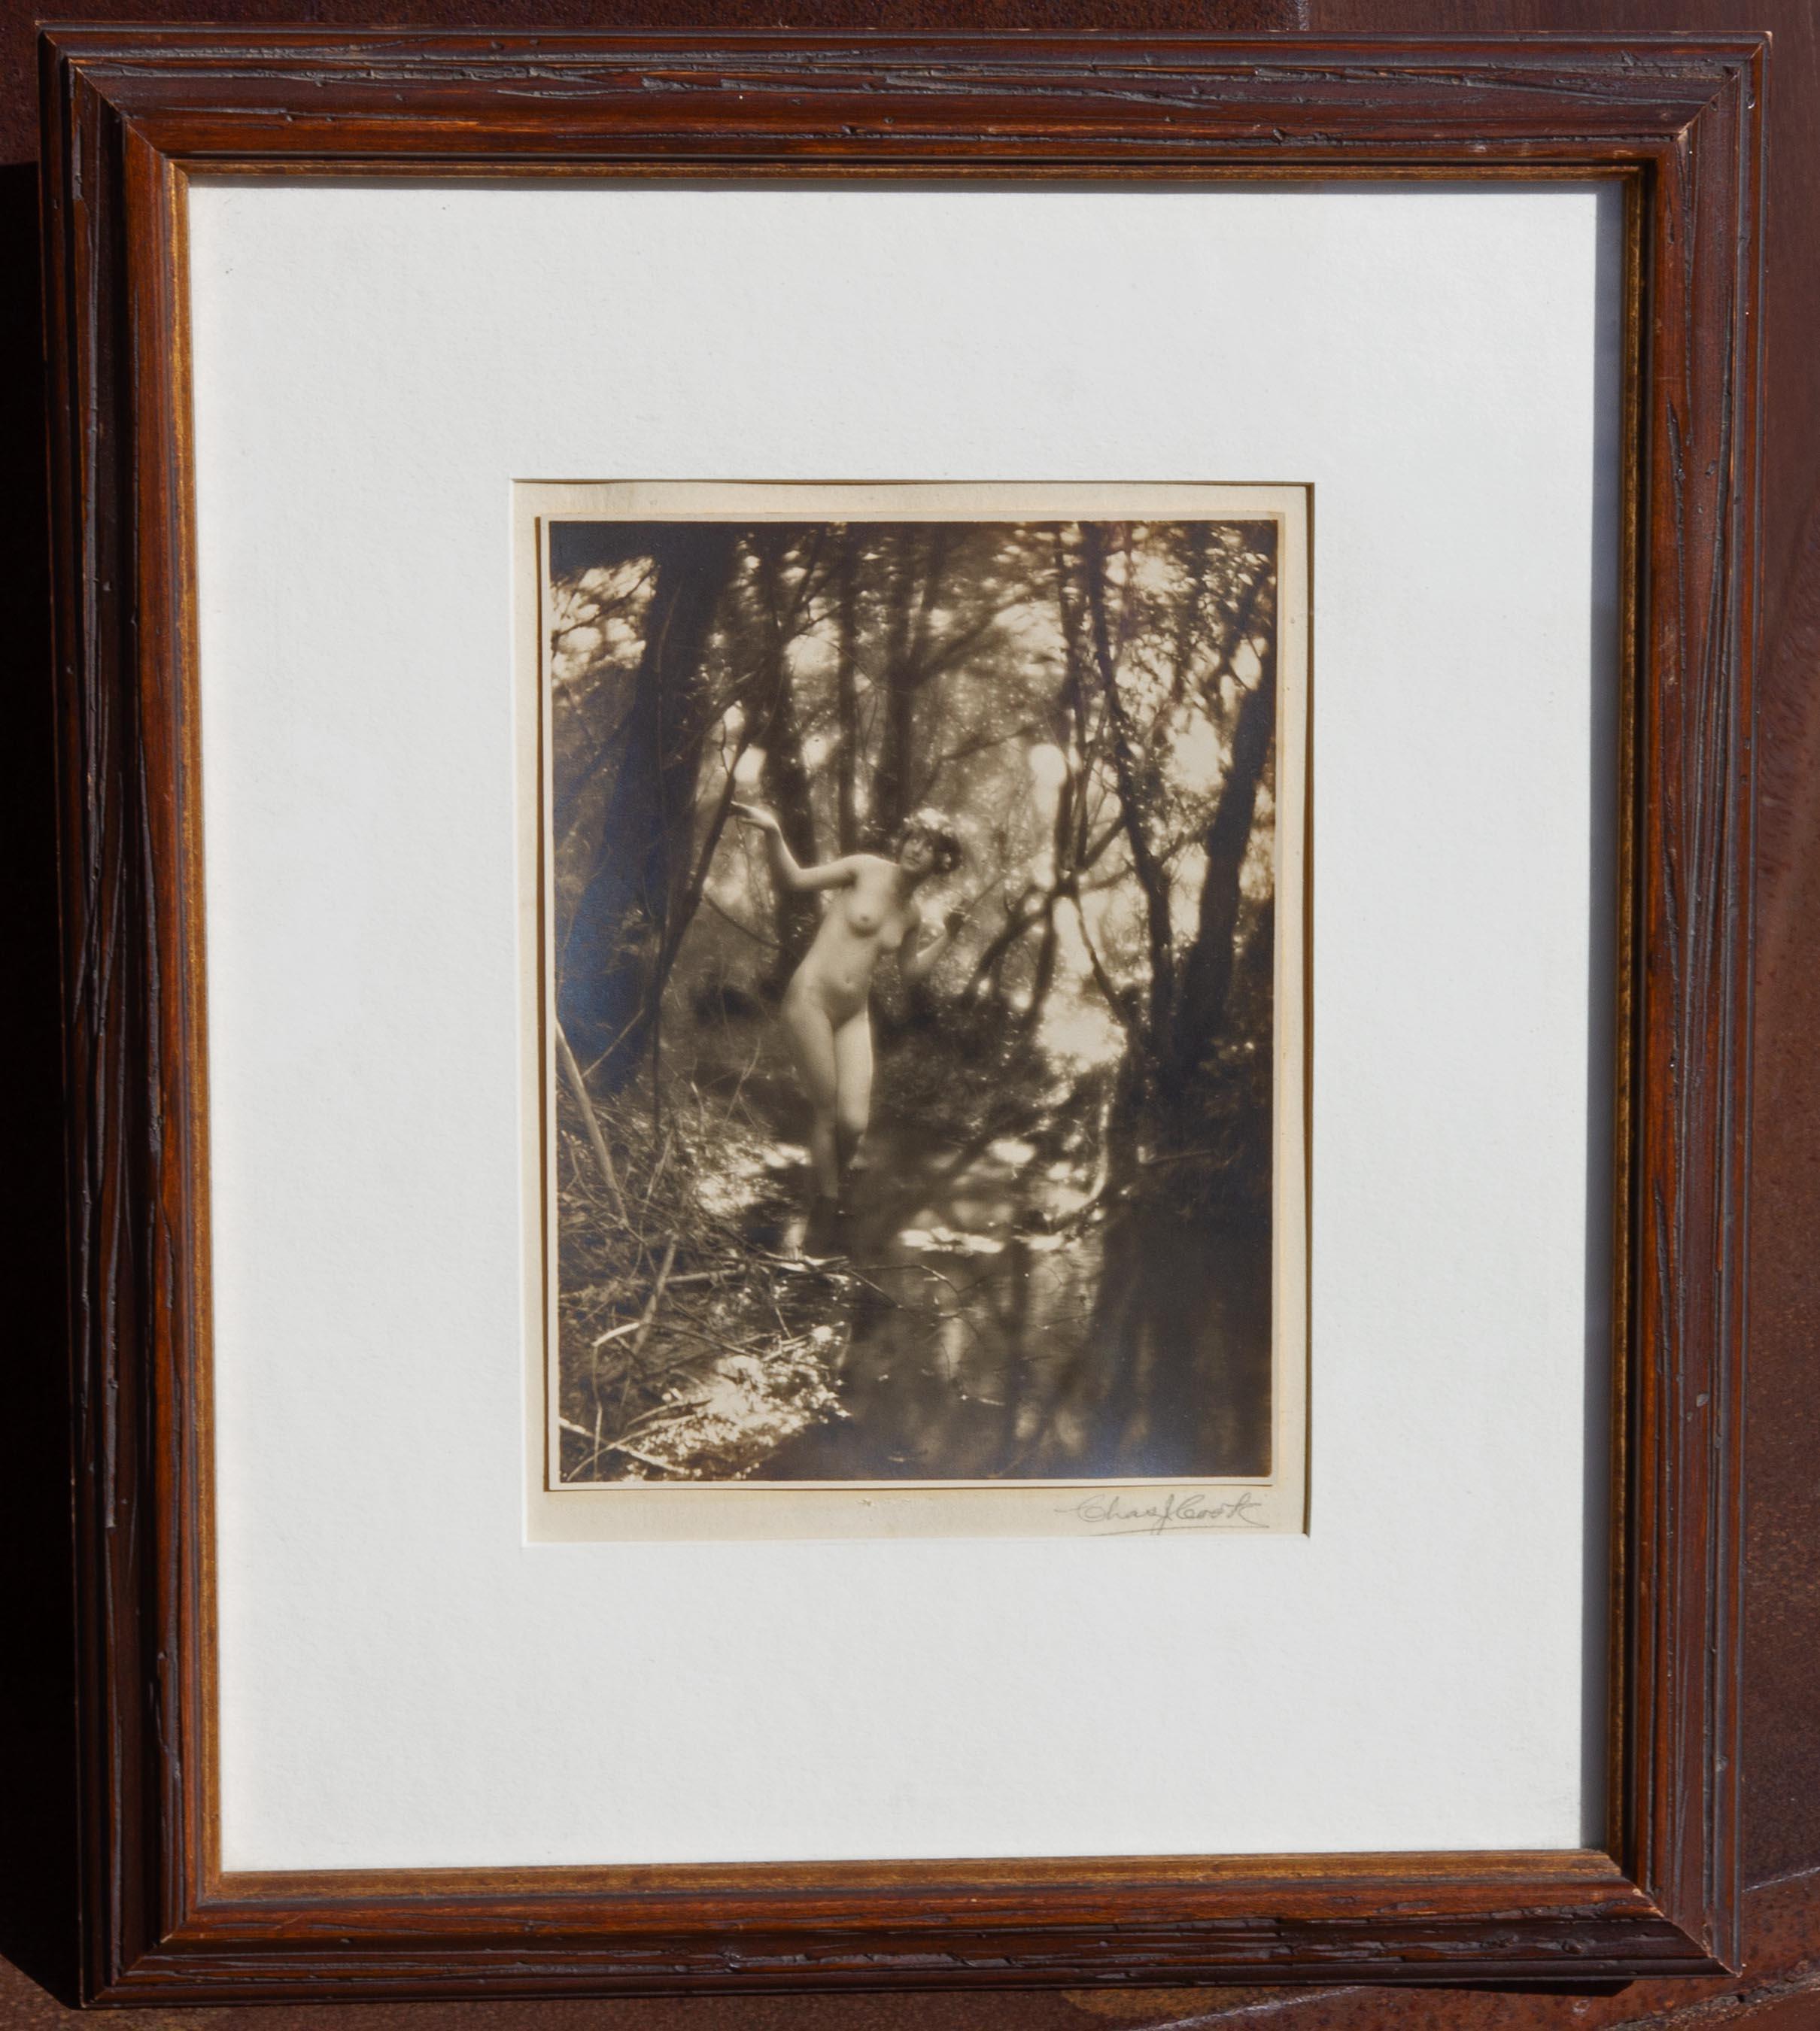 Pictorialist photograph of nude woman in a forest interior by Charles Cook. Silver print. Circa 1910.

Charles J. Cook was a painter and photographer who specialized in nudes. He was a resident of Chicago’s Tree Studios building between at least